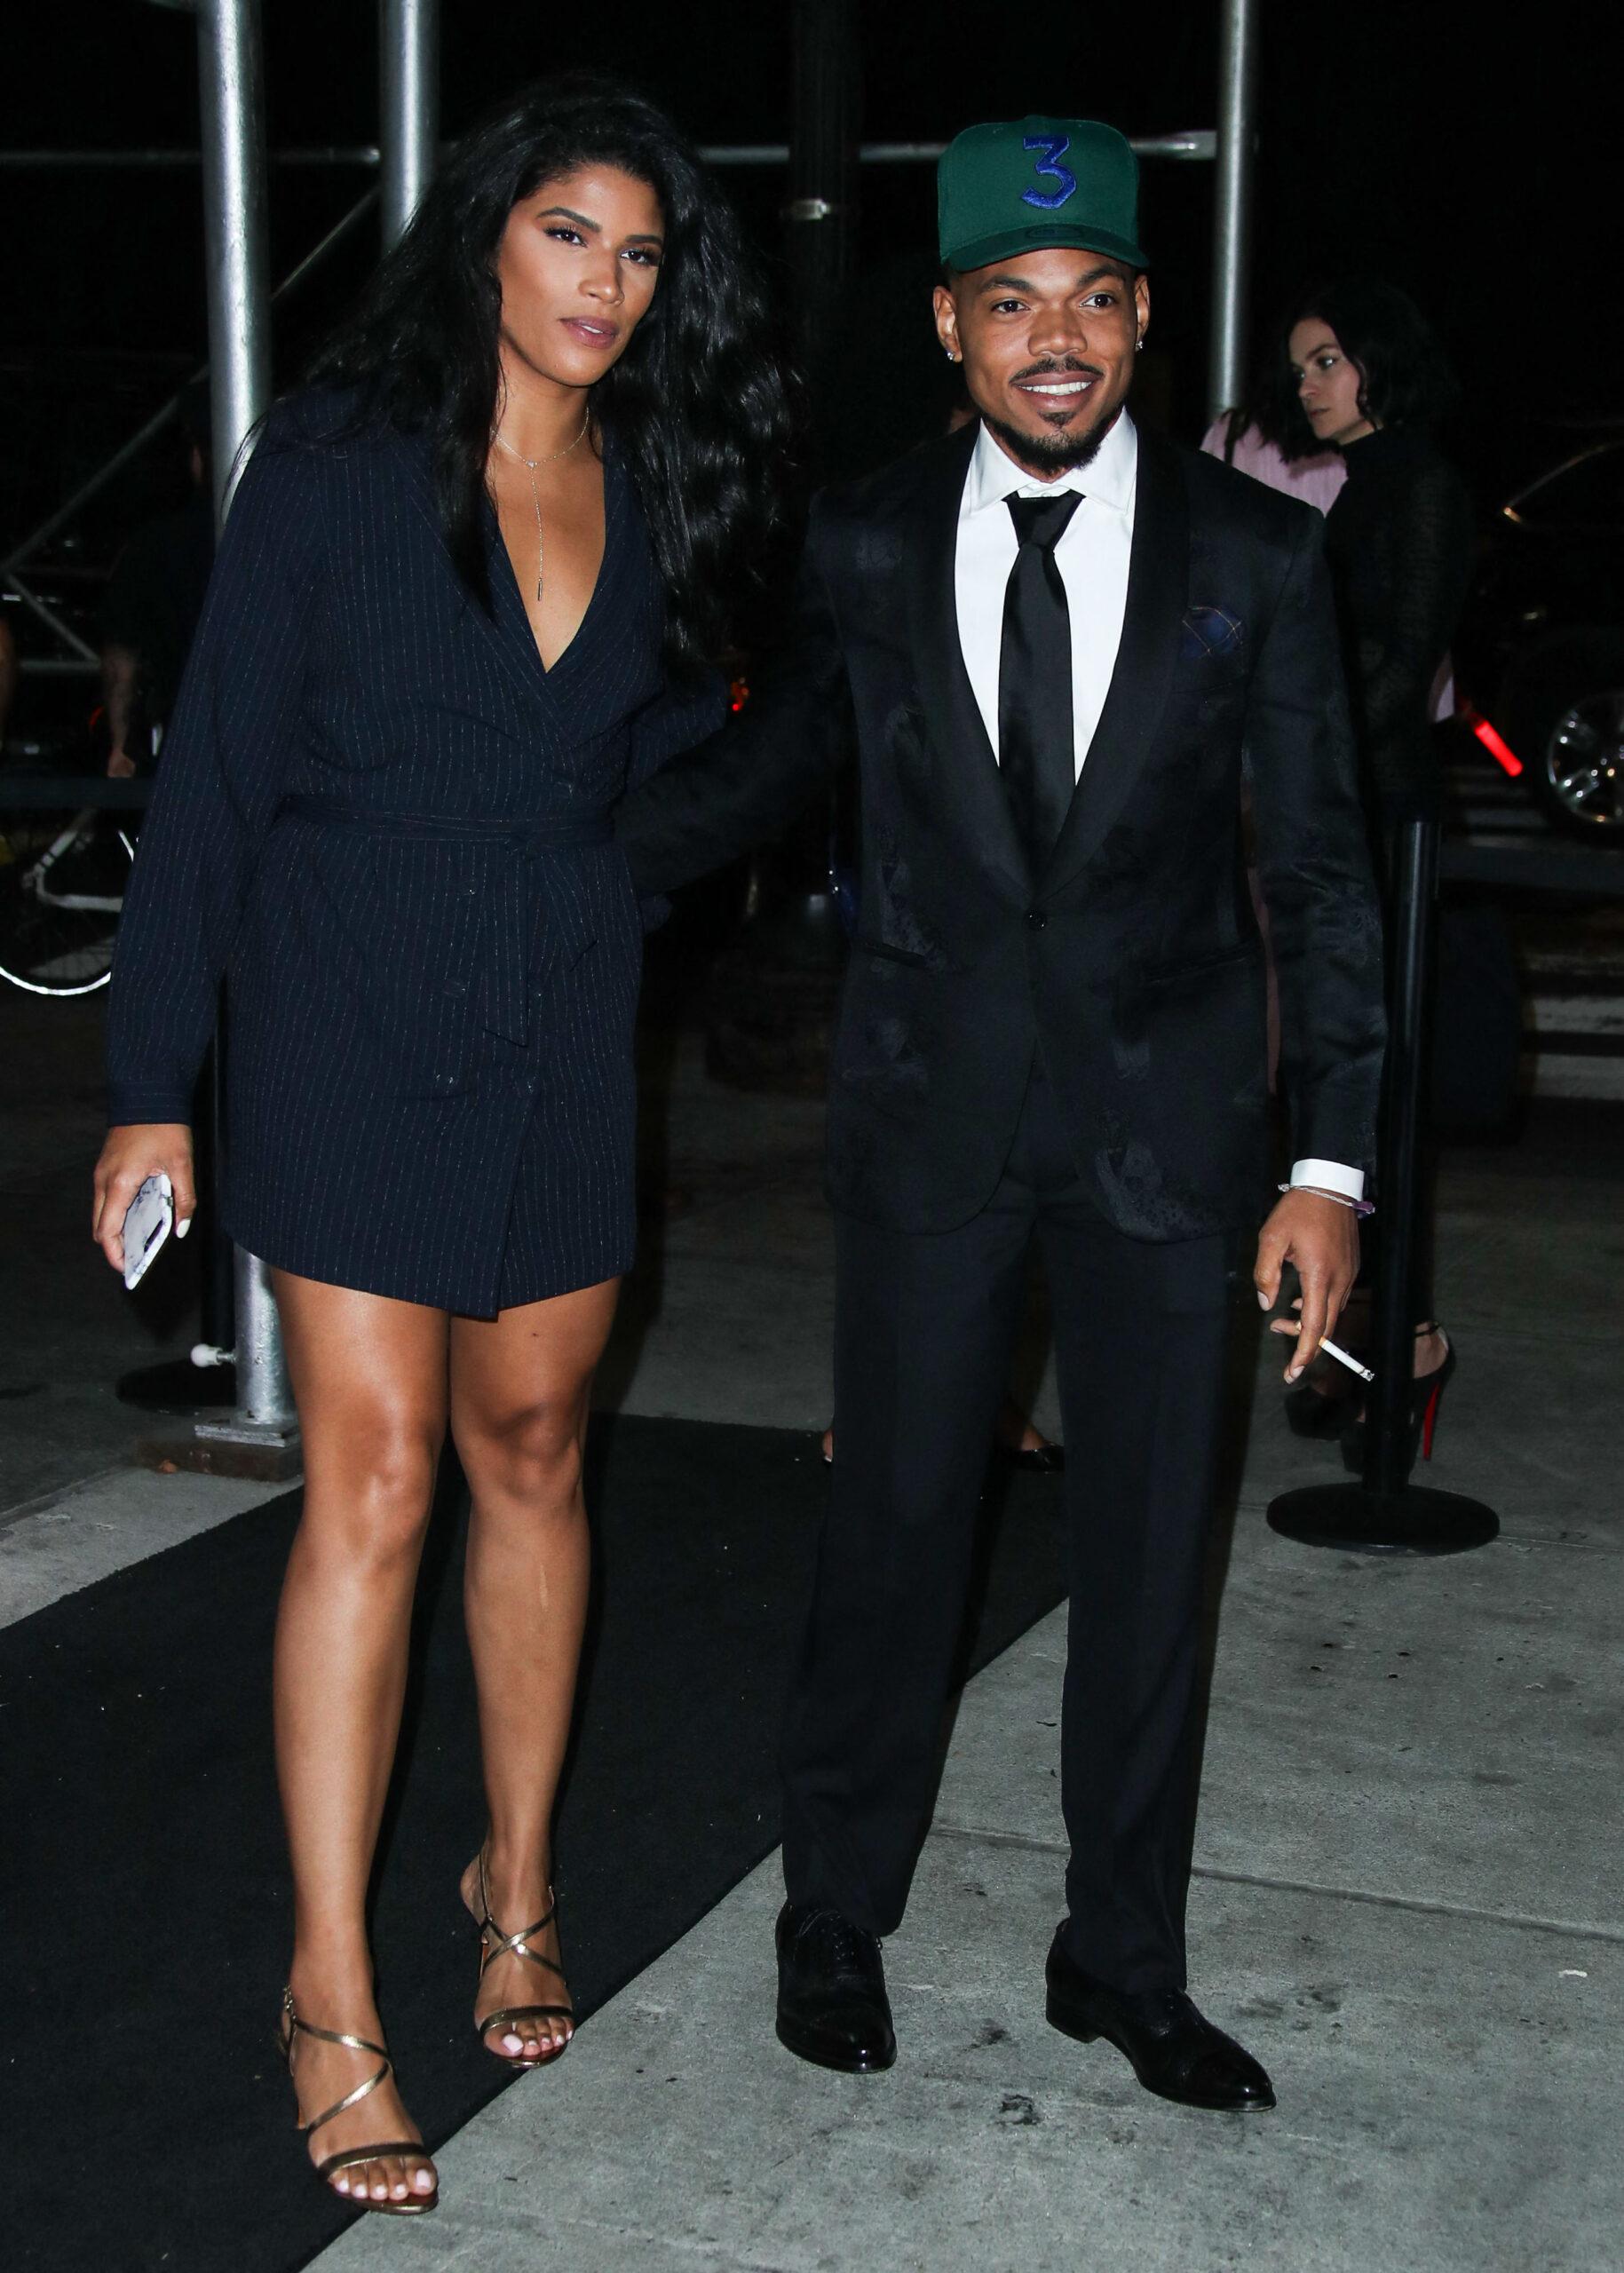 Kirsten Corley and Chance the Rapper at Harper's BAZAAR Celebrates 'ICONS By Carine Roitfeld'